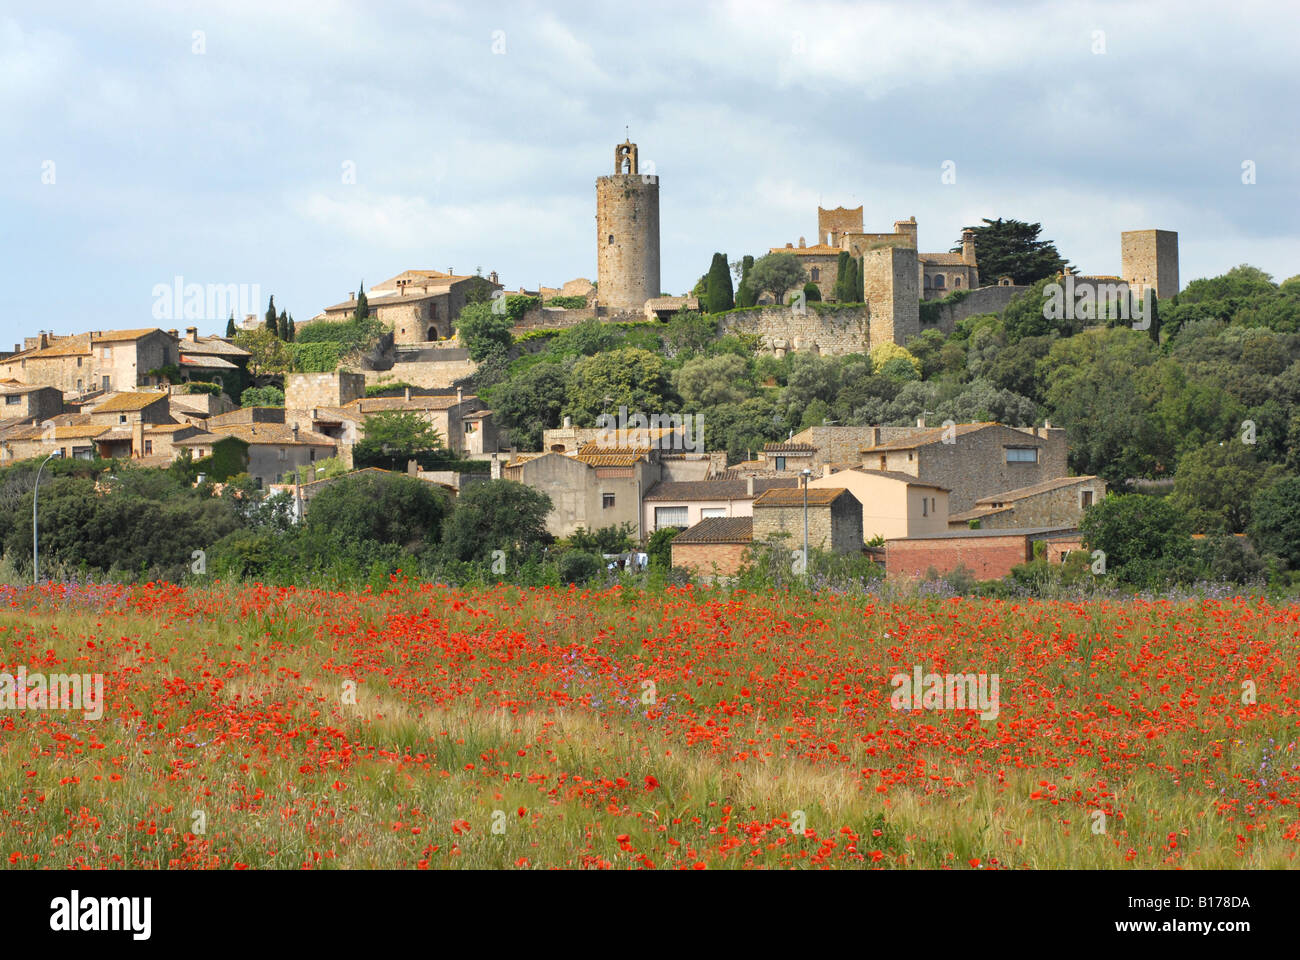 Poppy fields at Pals Palafrugell in Spain Stock Photo